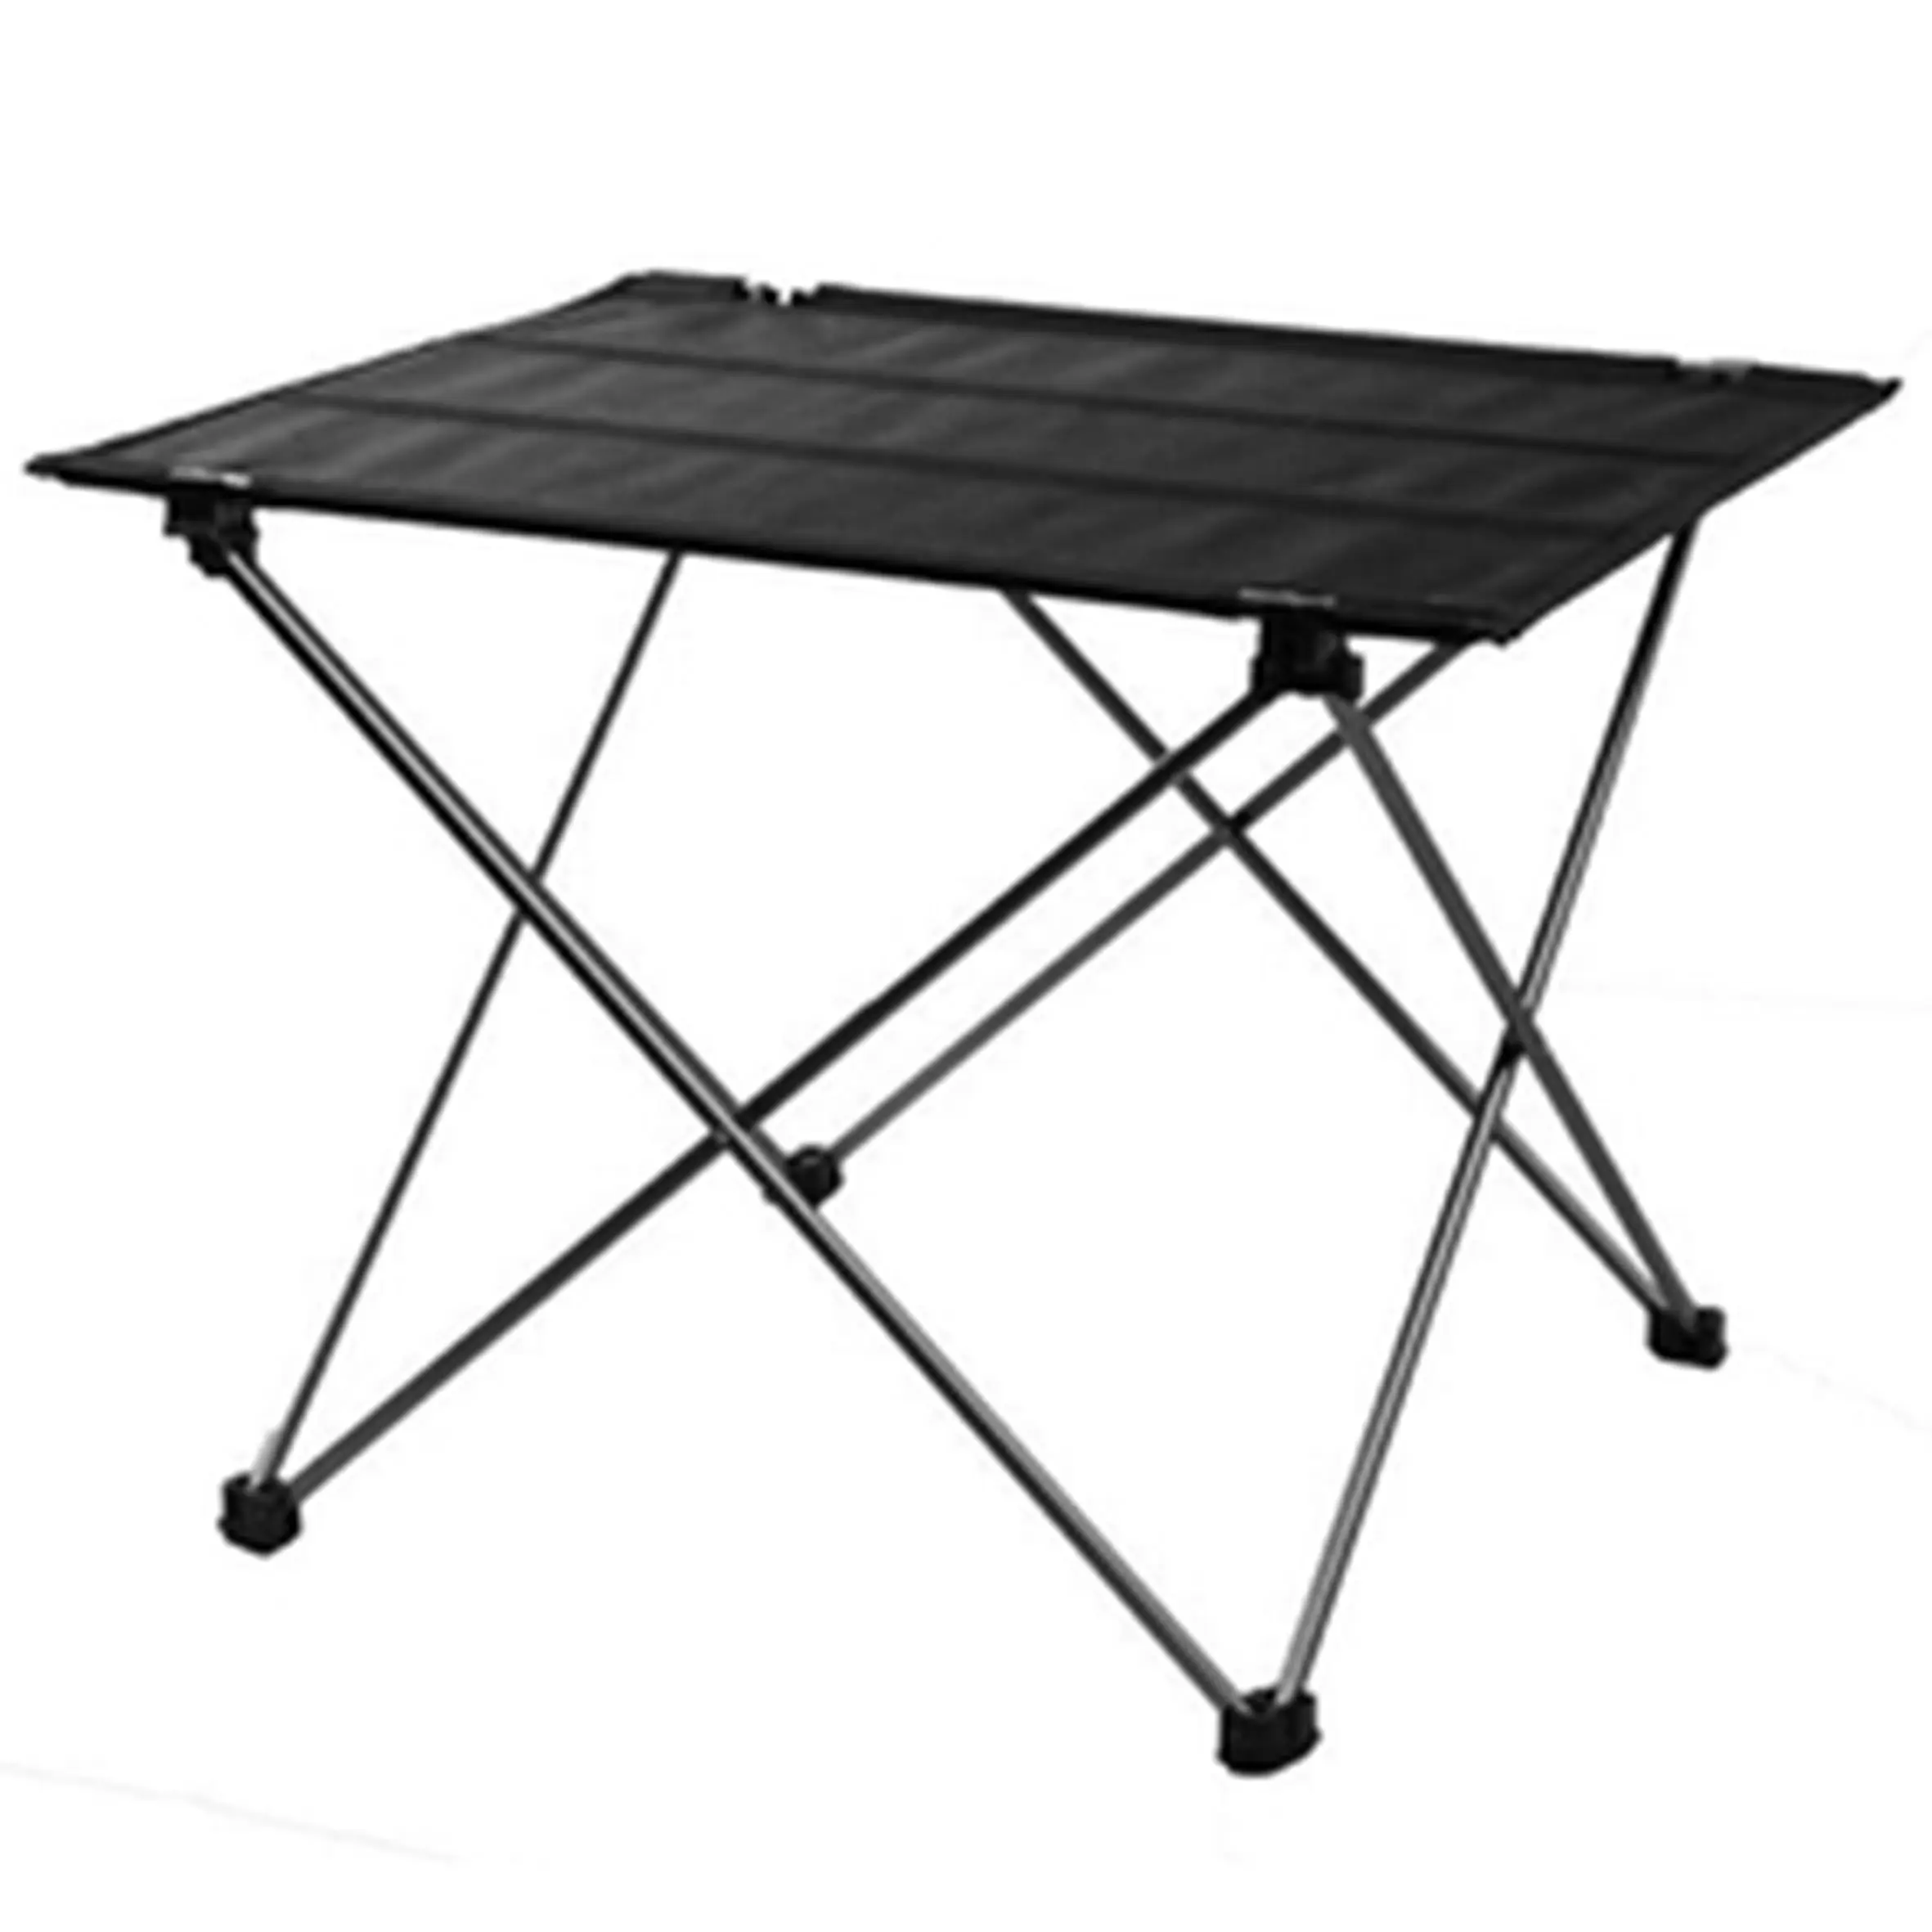 Thick And Large Foldable Collapsible Portable Heavy Duty,Aluminum Alloy Egg Roll Table Board For Outdoor Folding Camping Wagon/